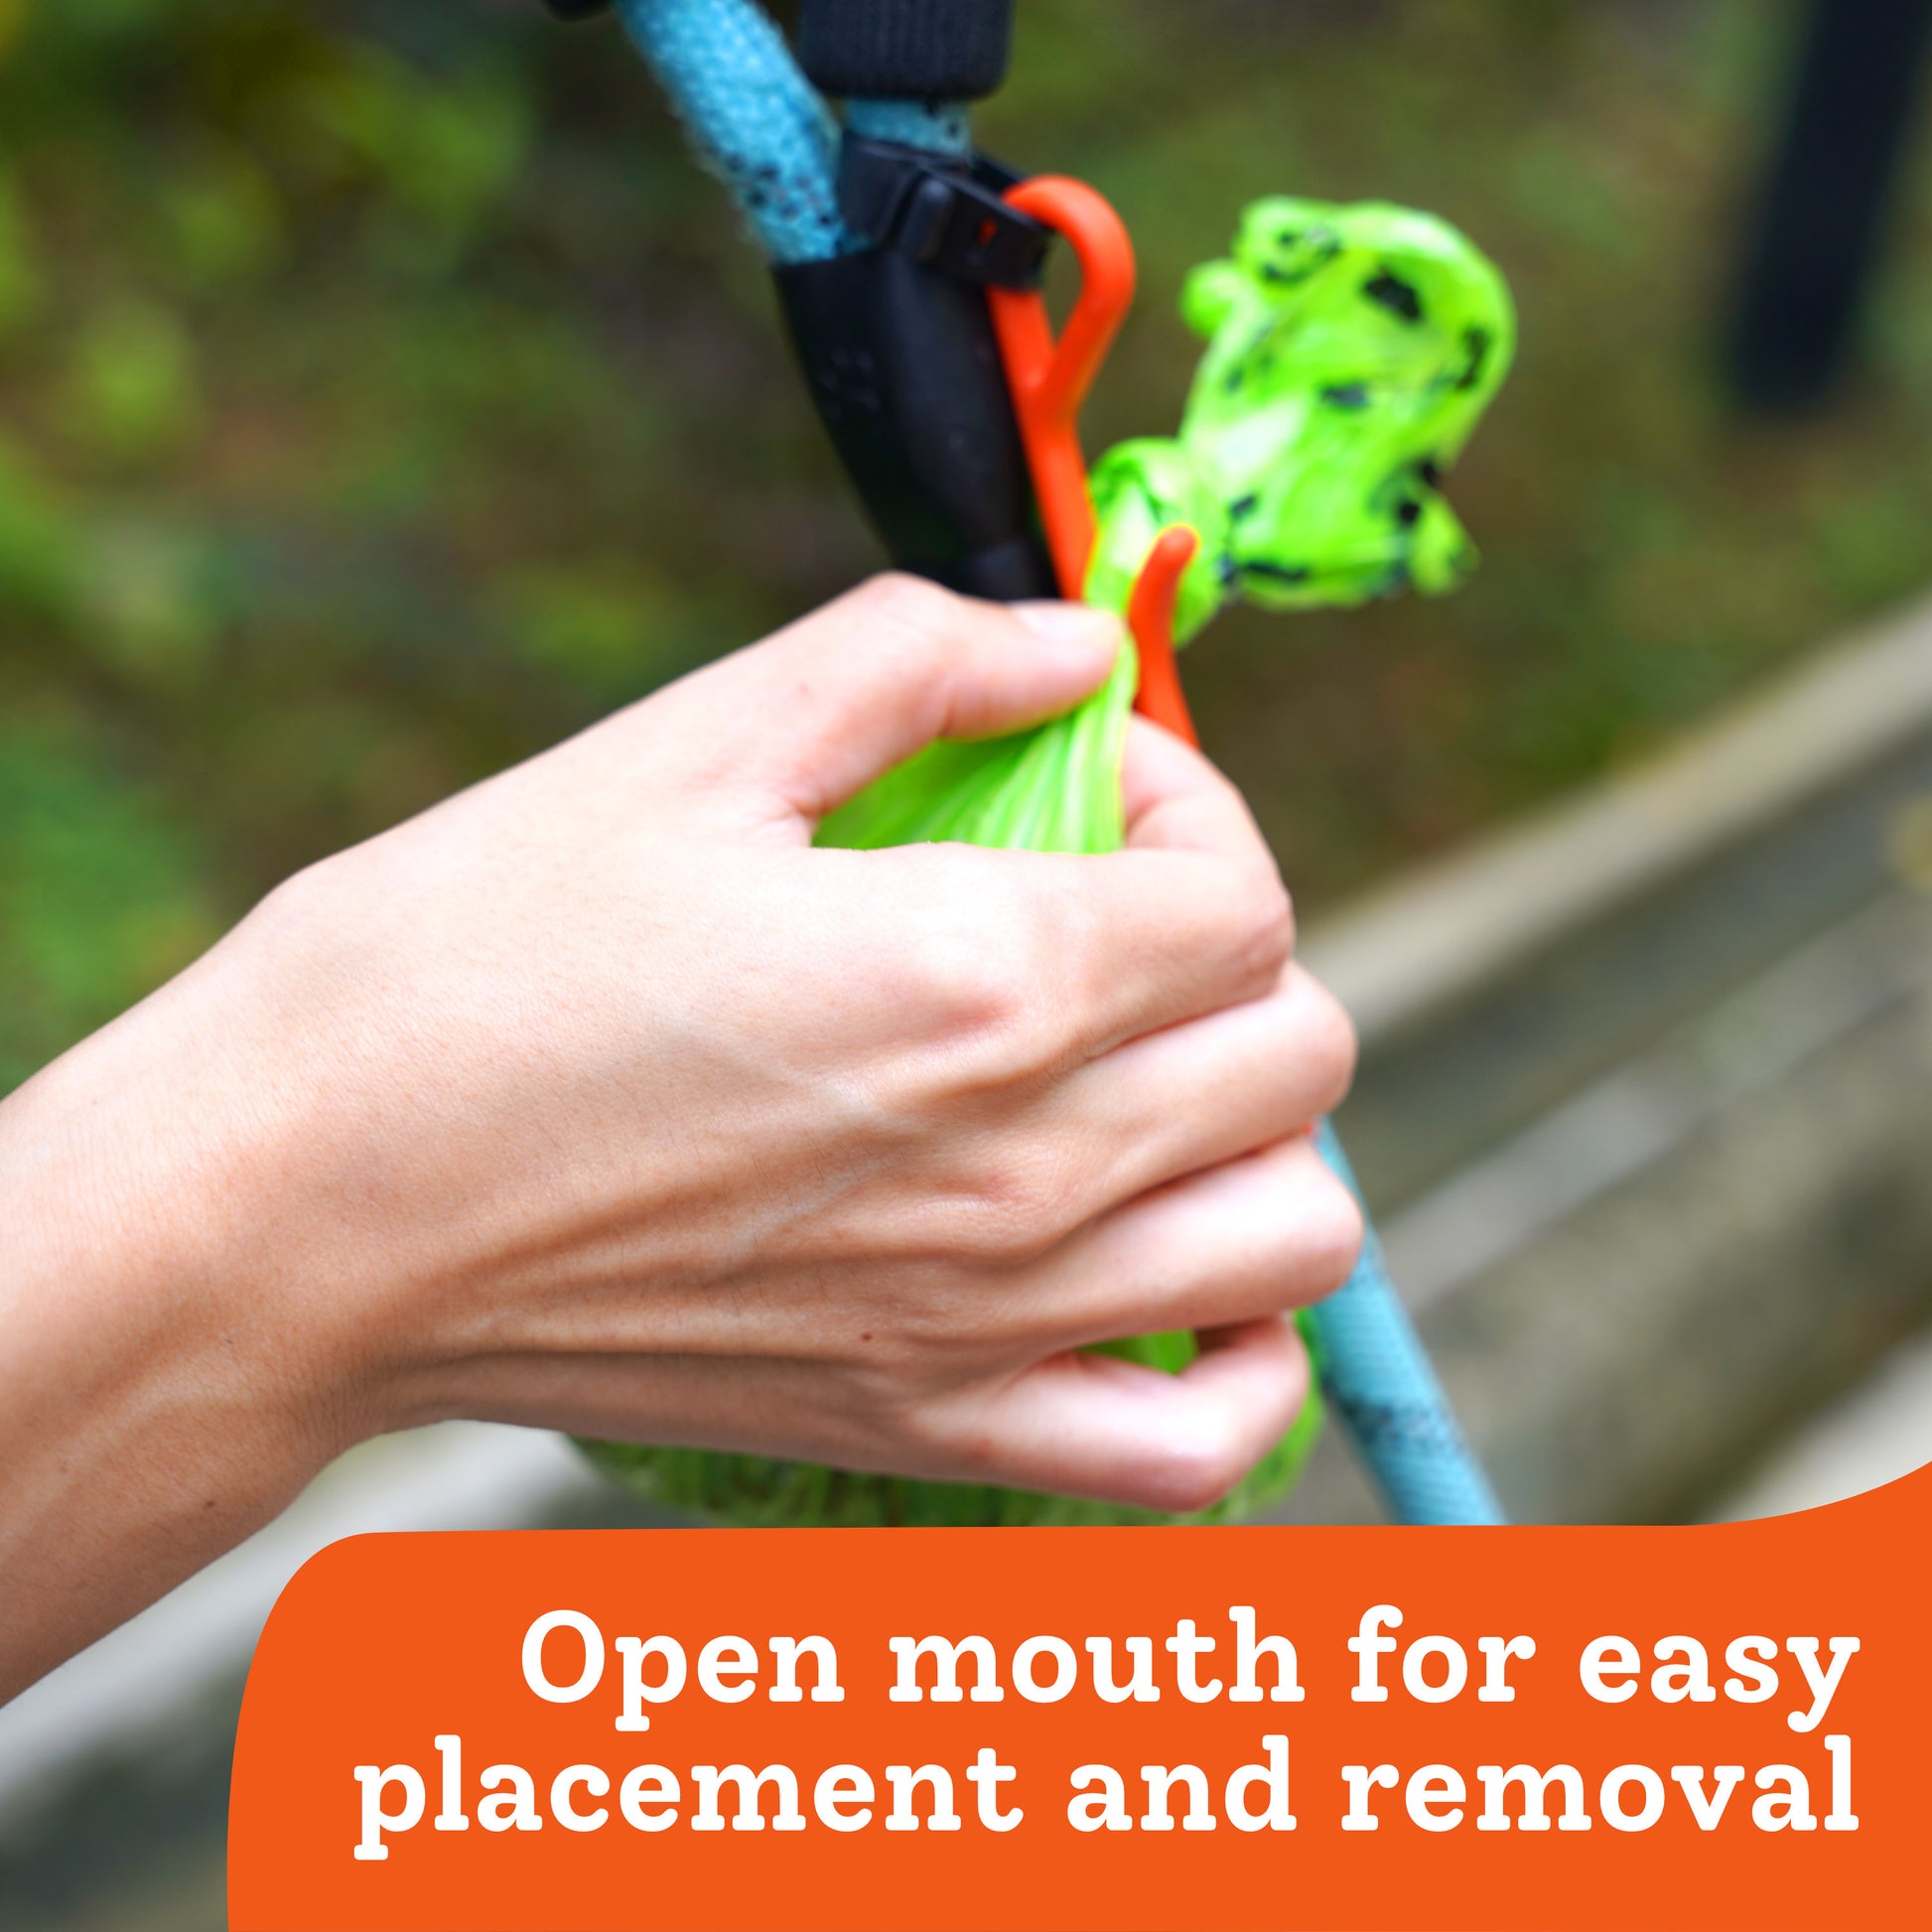 Open mouth for easy placement and removal